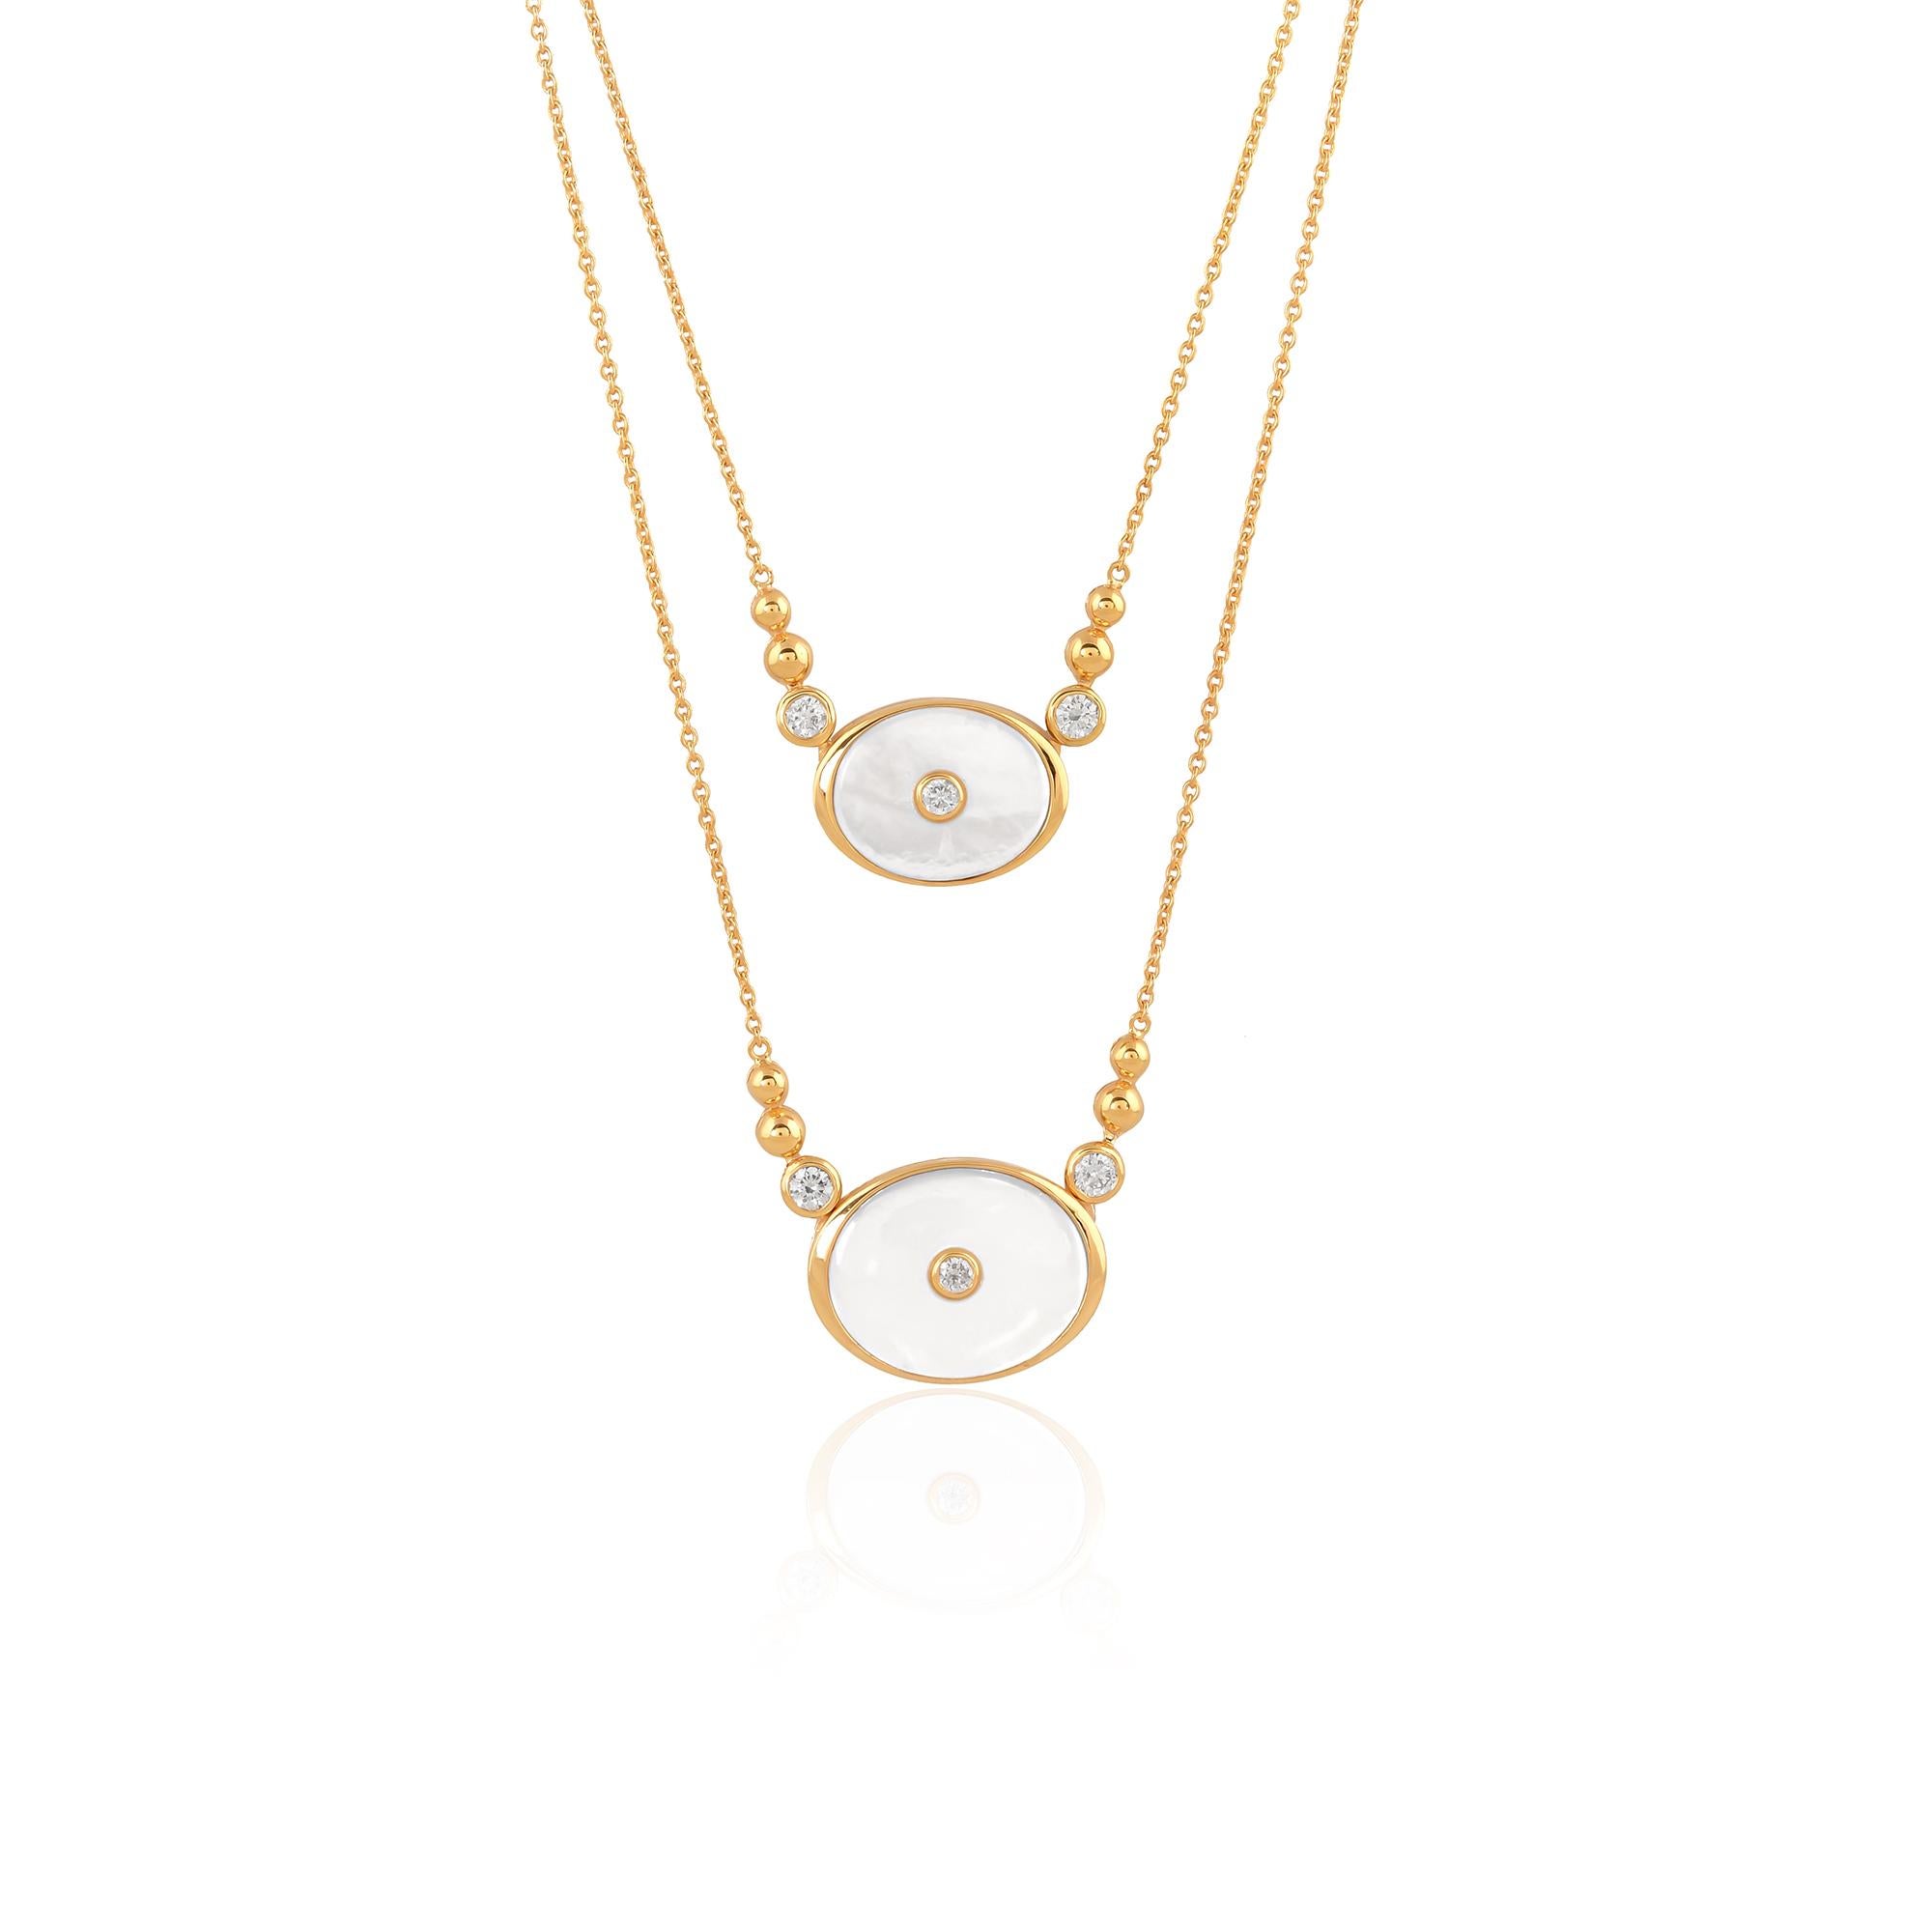 The pendant hangs gracefully from a sleek 14 Karat Yellow Gold chain, which complements the warmth of the gemstone and enhances its natural beauty. The chain features a secure clasp closure, ensuring that this necklace stays securely in place while